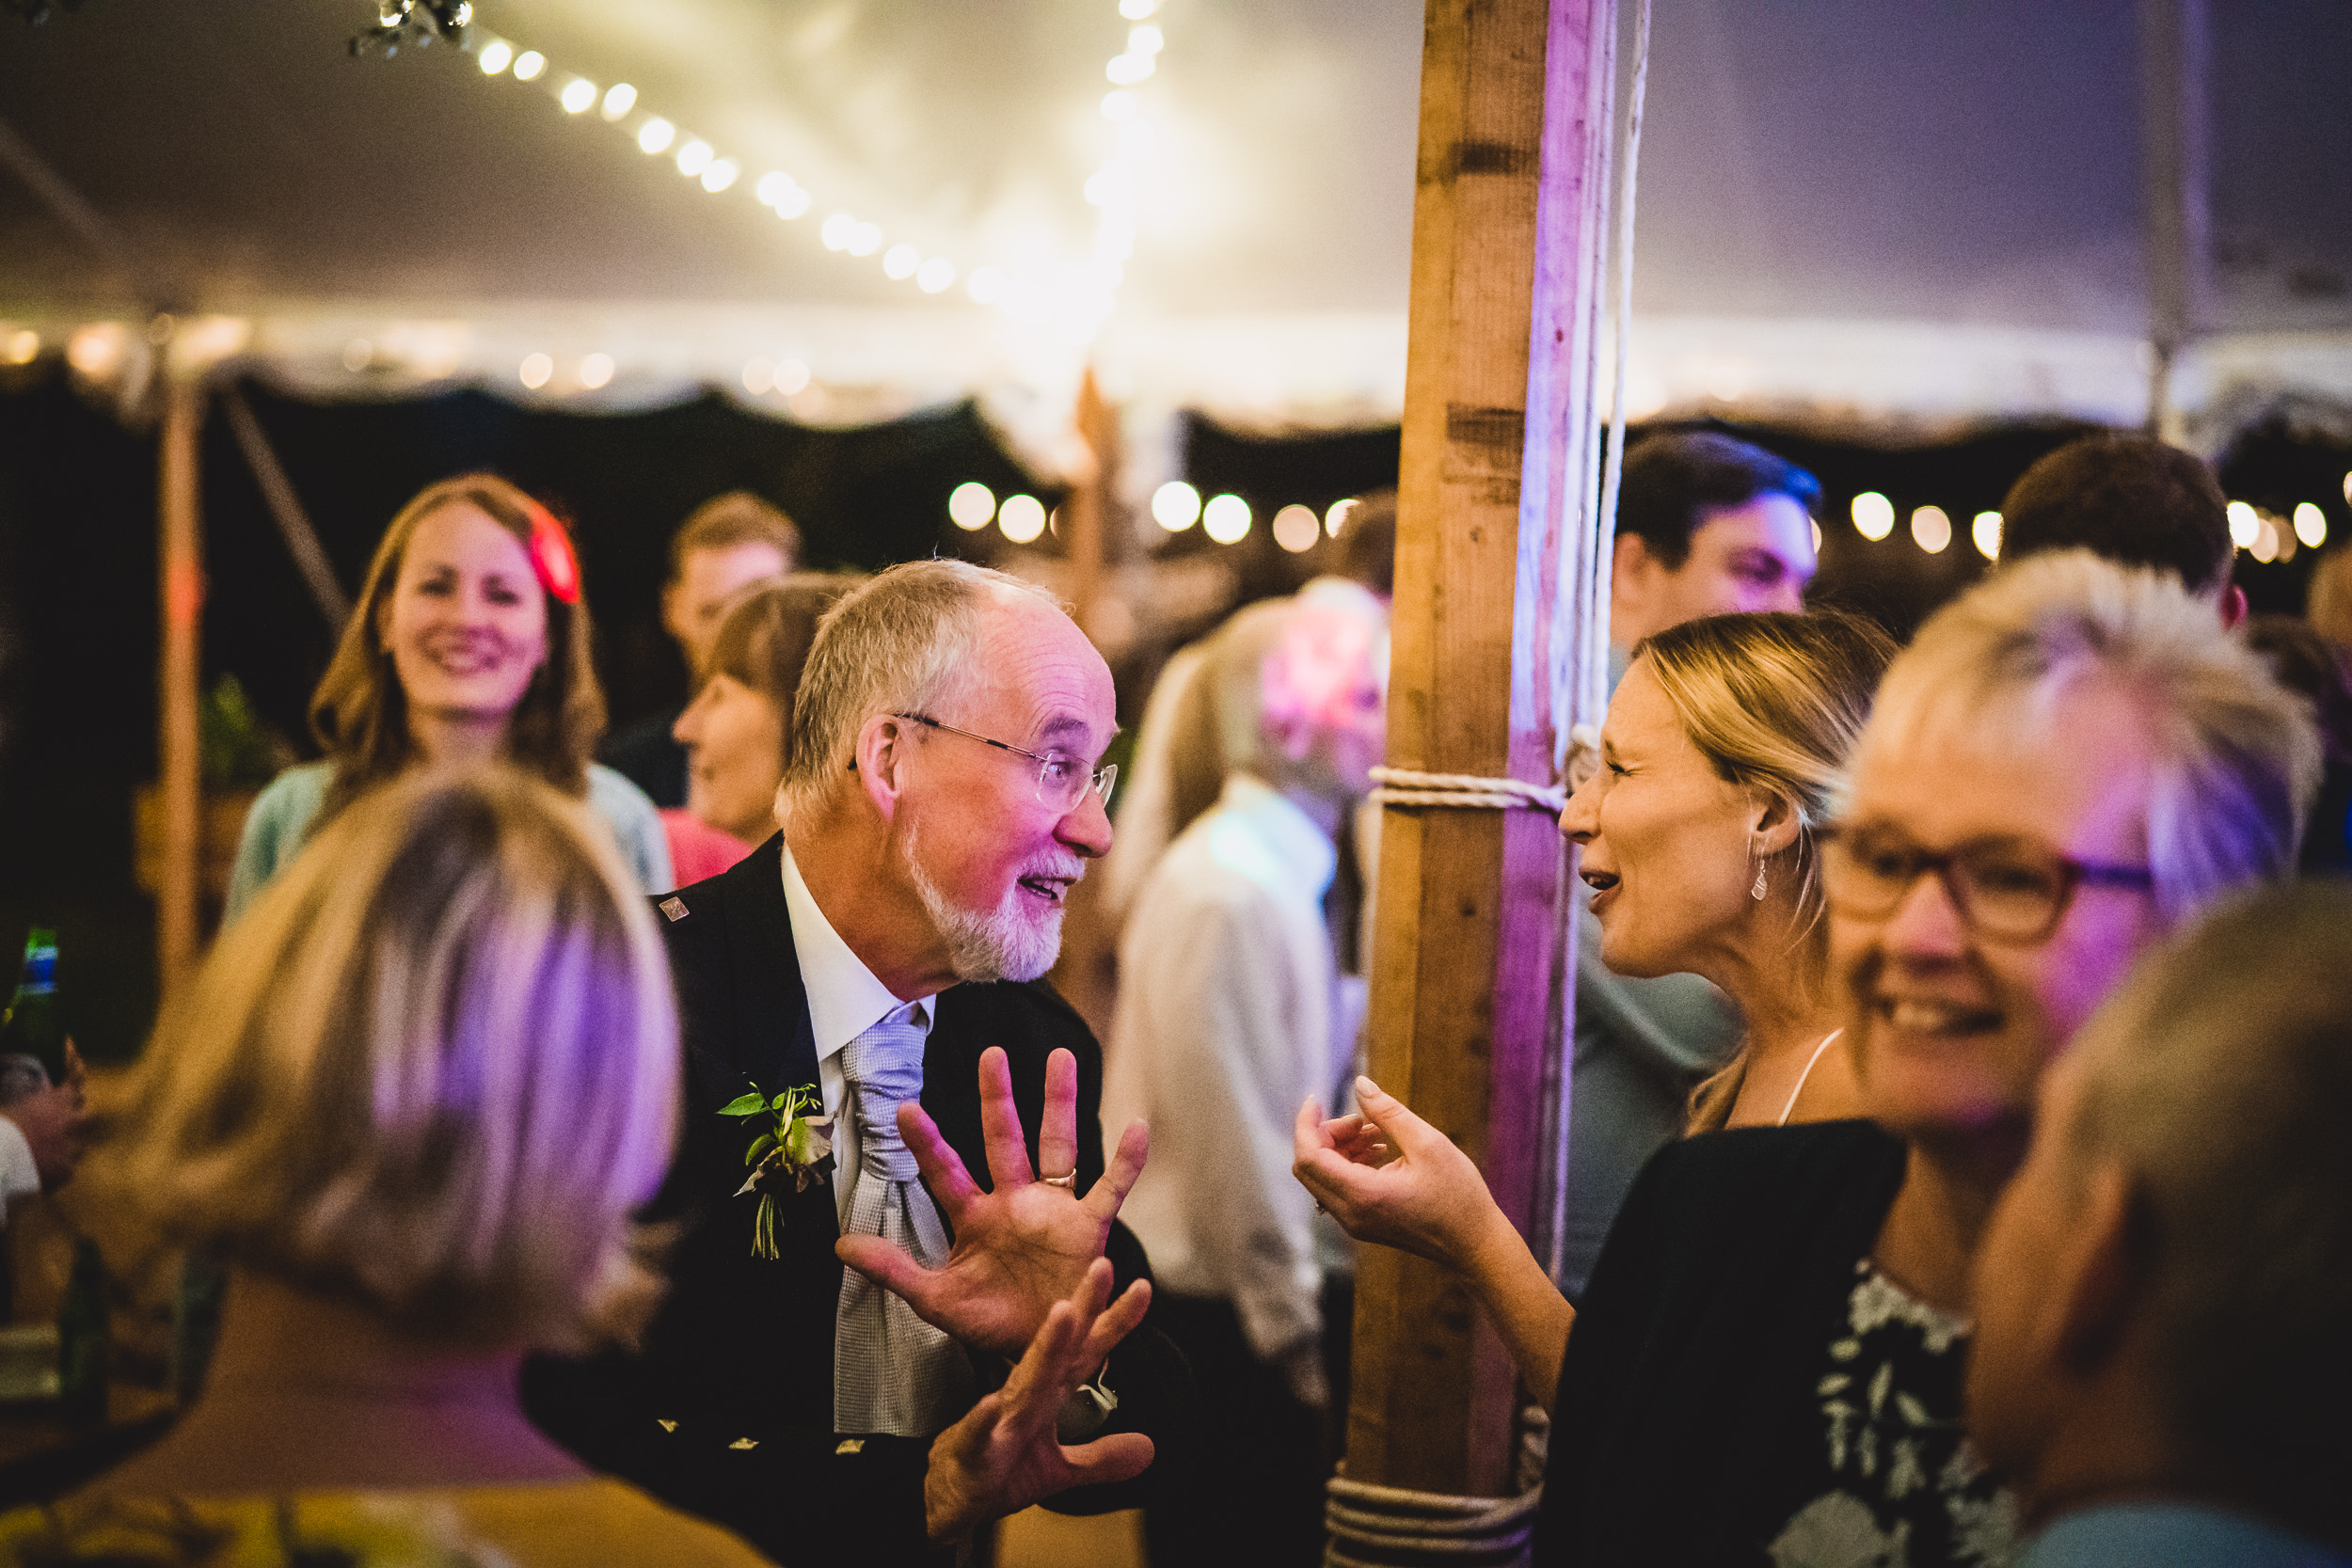 A group of people dancing in a tent at a wedding reception, captured in a joyful wedding photo.